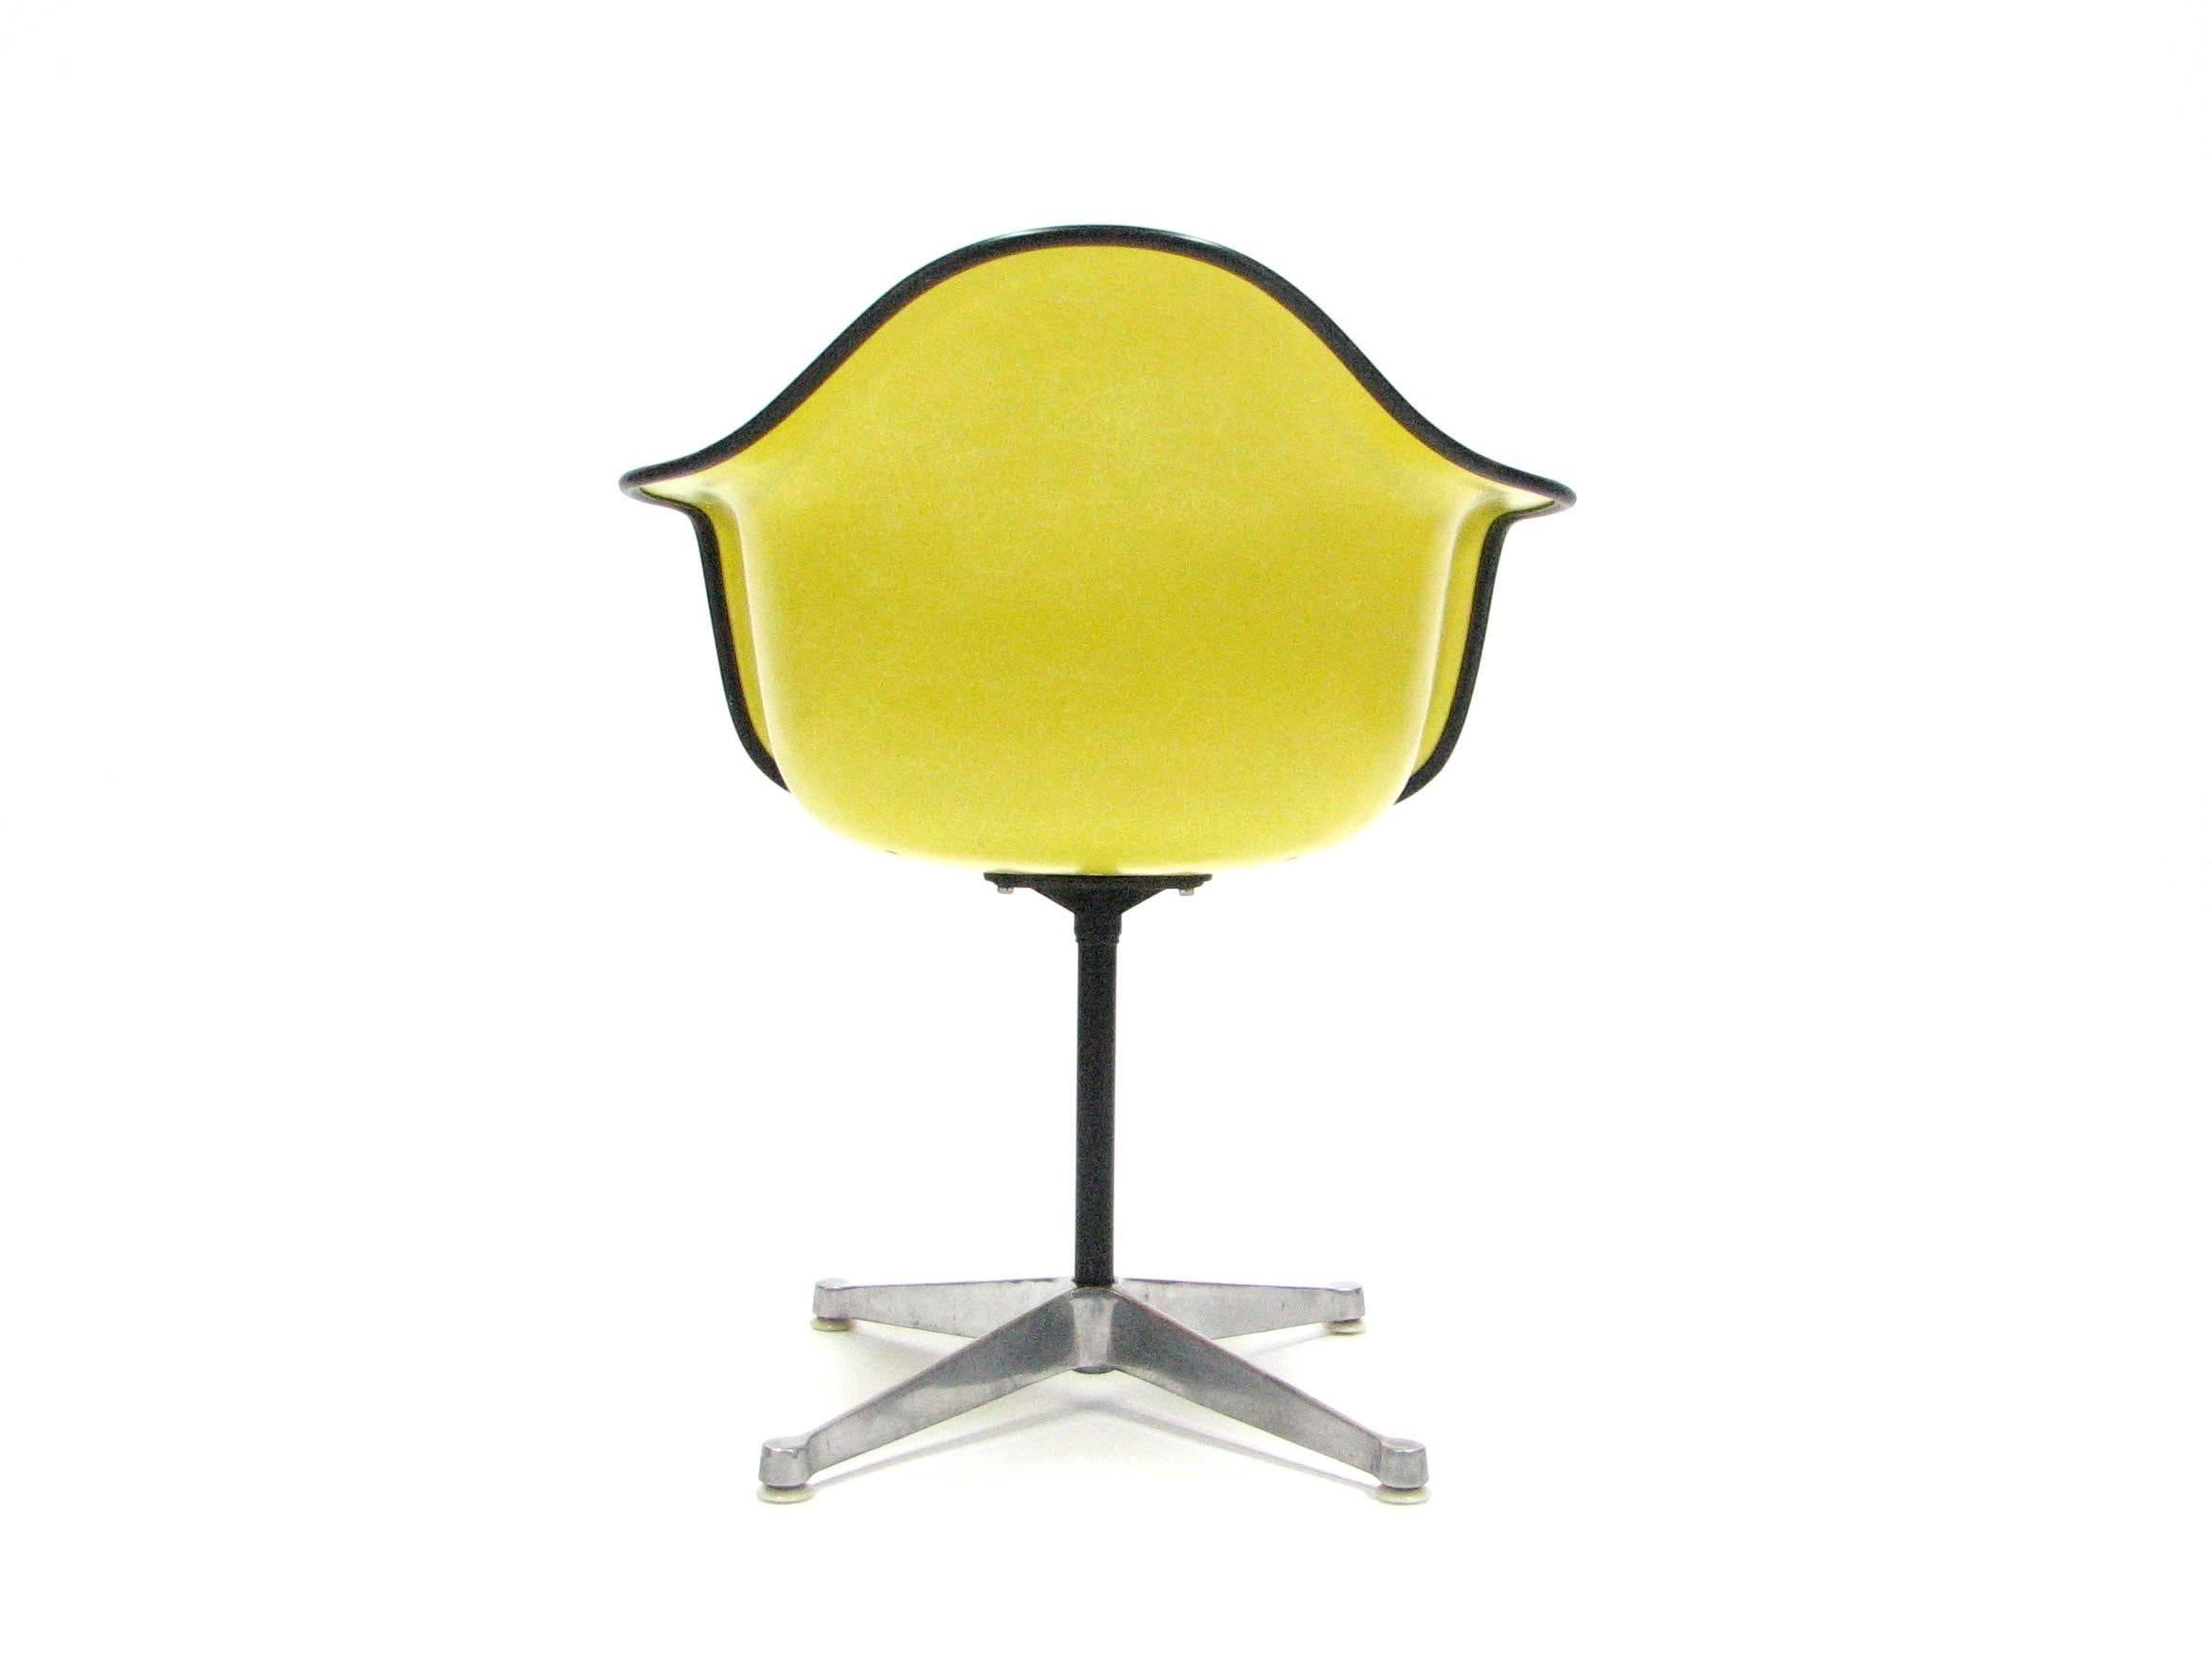 American Iconic Mid-Century Upholstered Eames PAC Fiberglass Chair for Herman Miller